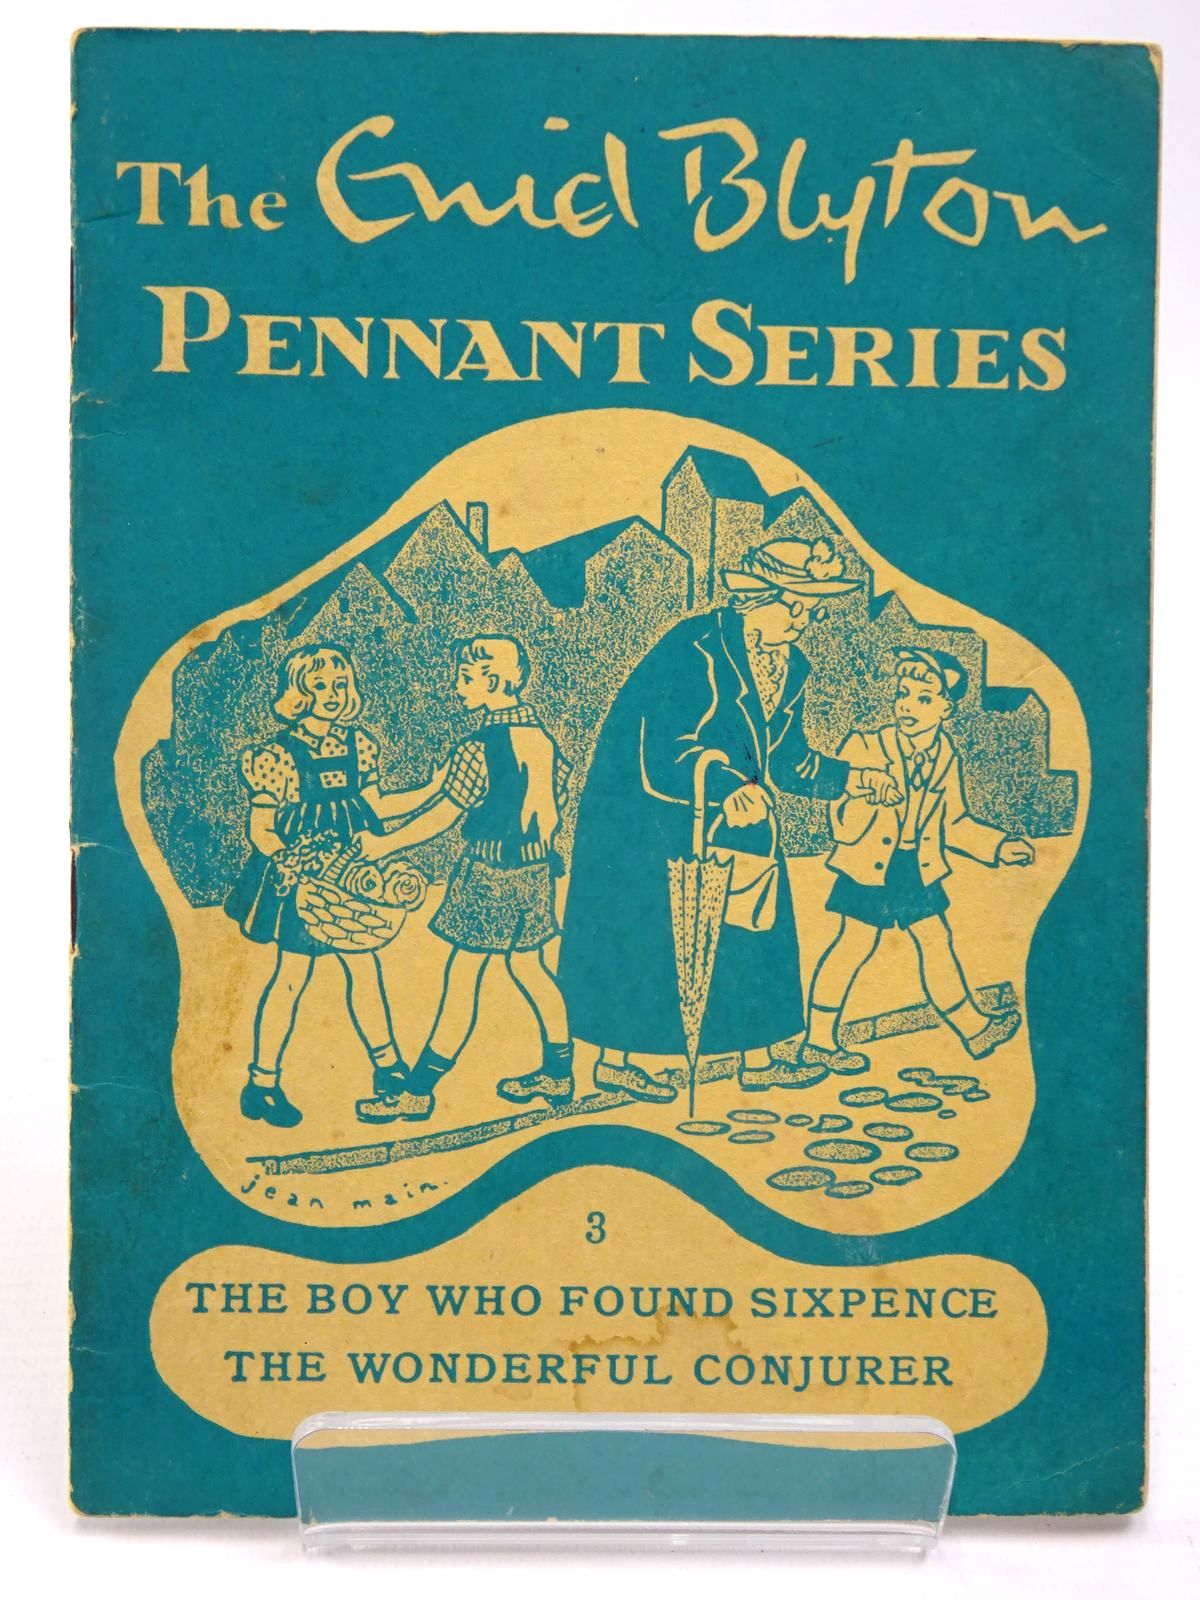 Photo of THE ENID BLYTON PENNANT SERIES No. 3 THE BOY WHO FOUND SIXPENCE / THE WONDERFUL CONJURER written by Blyton, Enid illustrated by Soper, Eileen Main, Jean published by Macmillan &amp; Co. Ltd. (STOCK CODE: 2130531)  for sale by Stella & Rose's Books